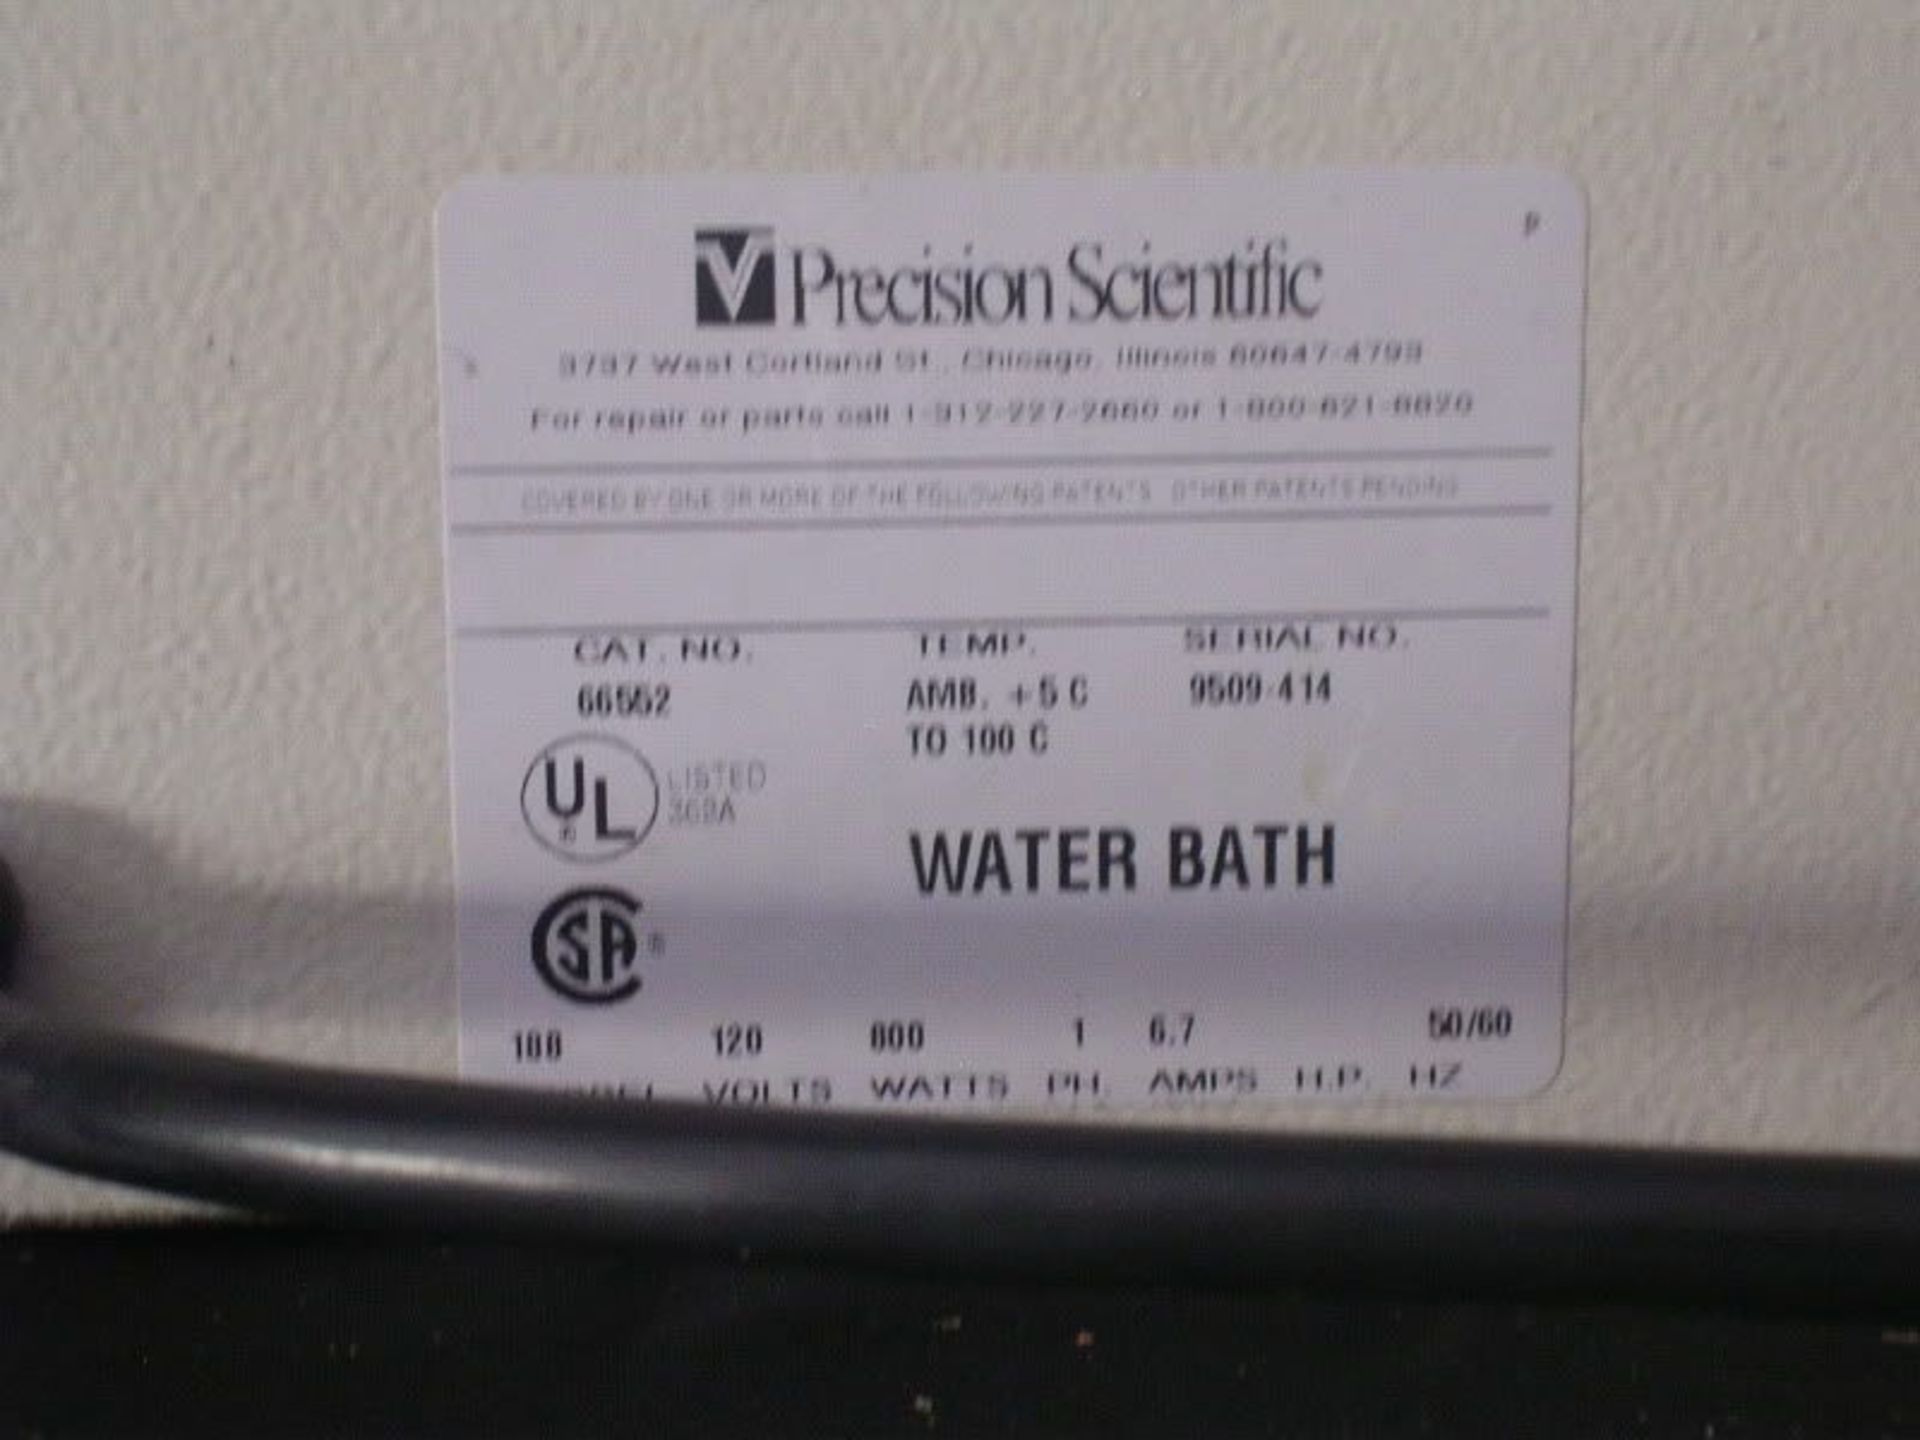 Precision Scientific All Stainless Steel Dual Heater Water Bath Model 188, Qty 1, 220883062468 - Image 6 of 8